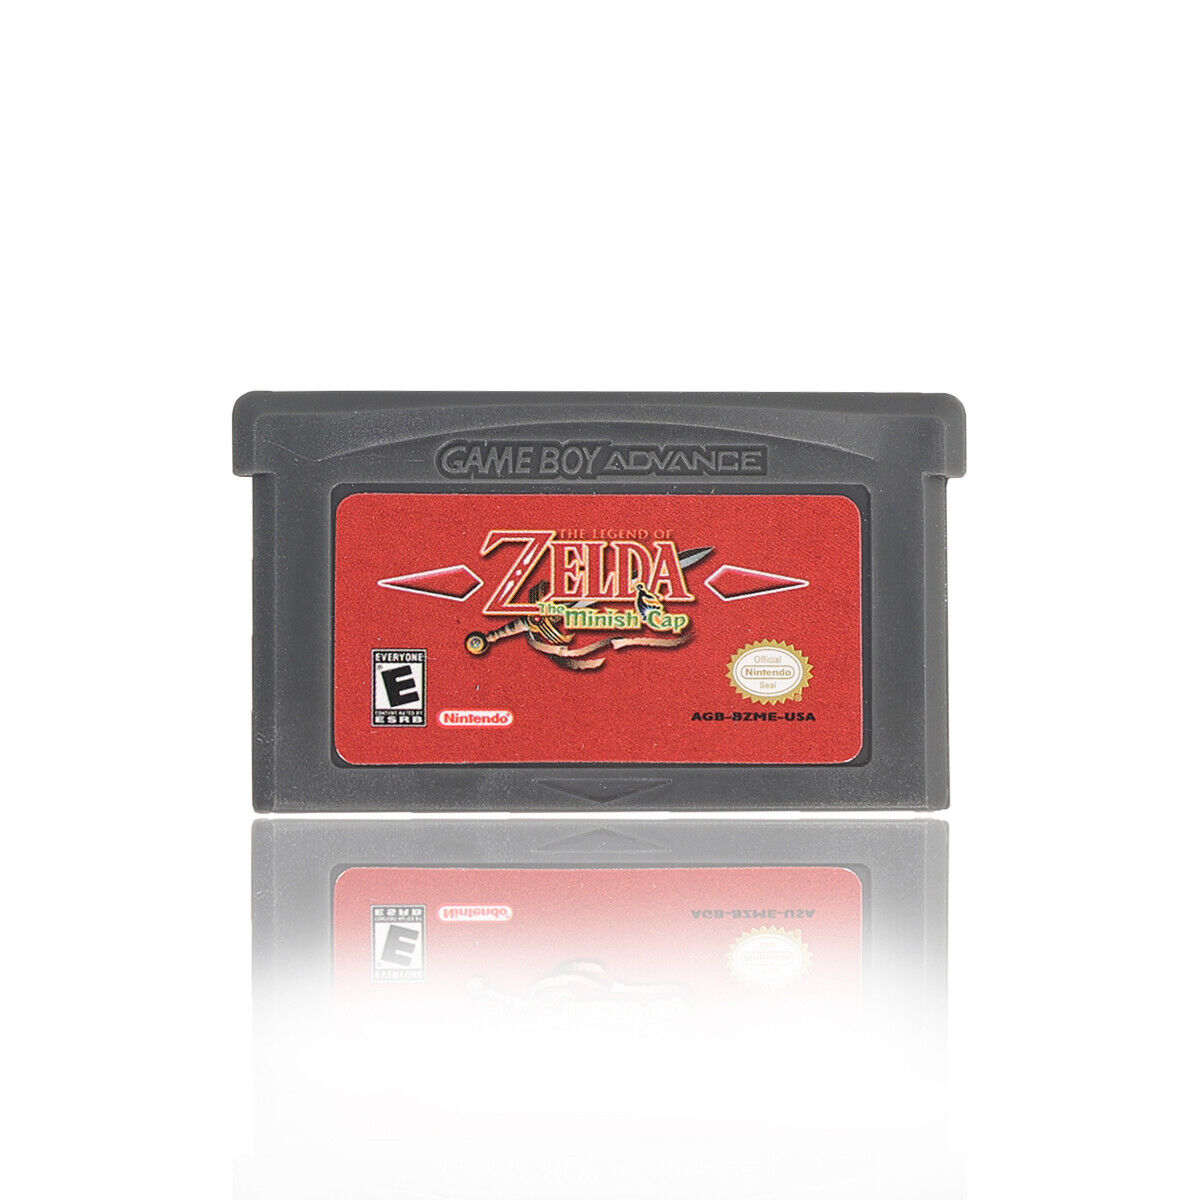 The Legend of Zelda Series For Game Boy Advance